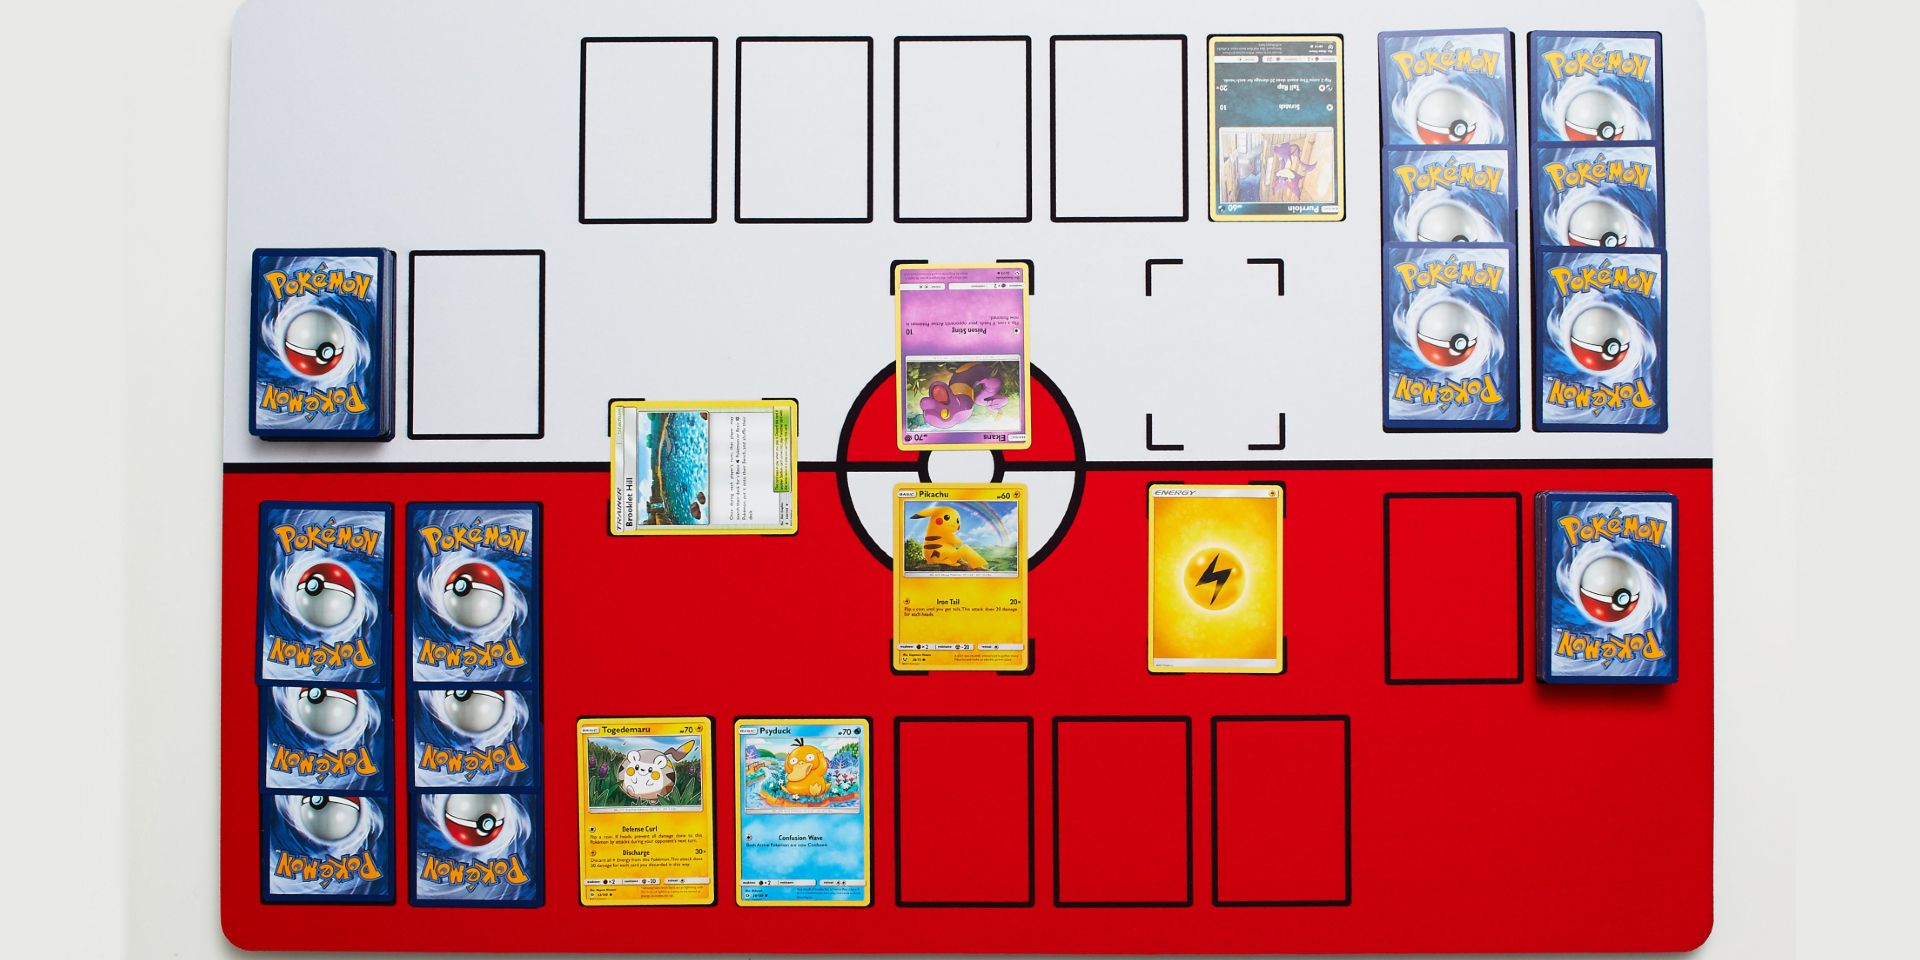 guide image for how to play the pokemon trading card game on a physical play mat displaying where all cards go.